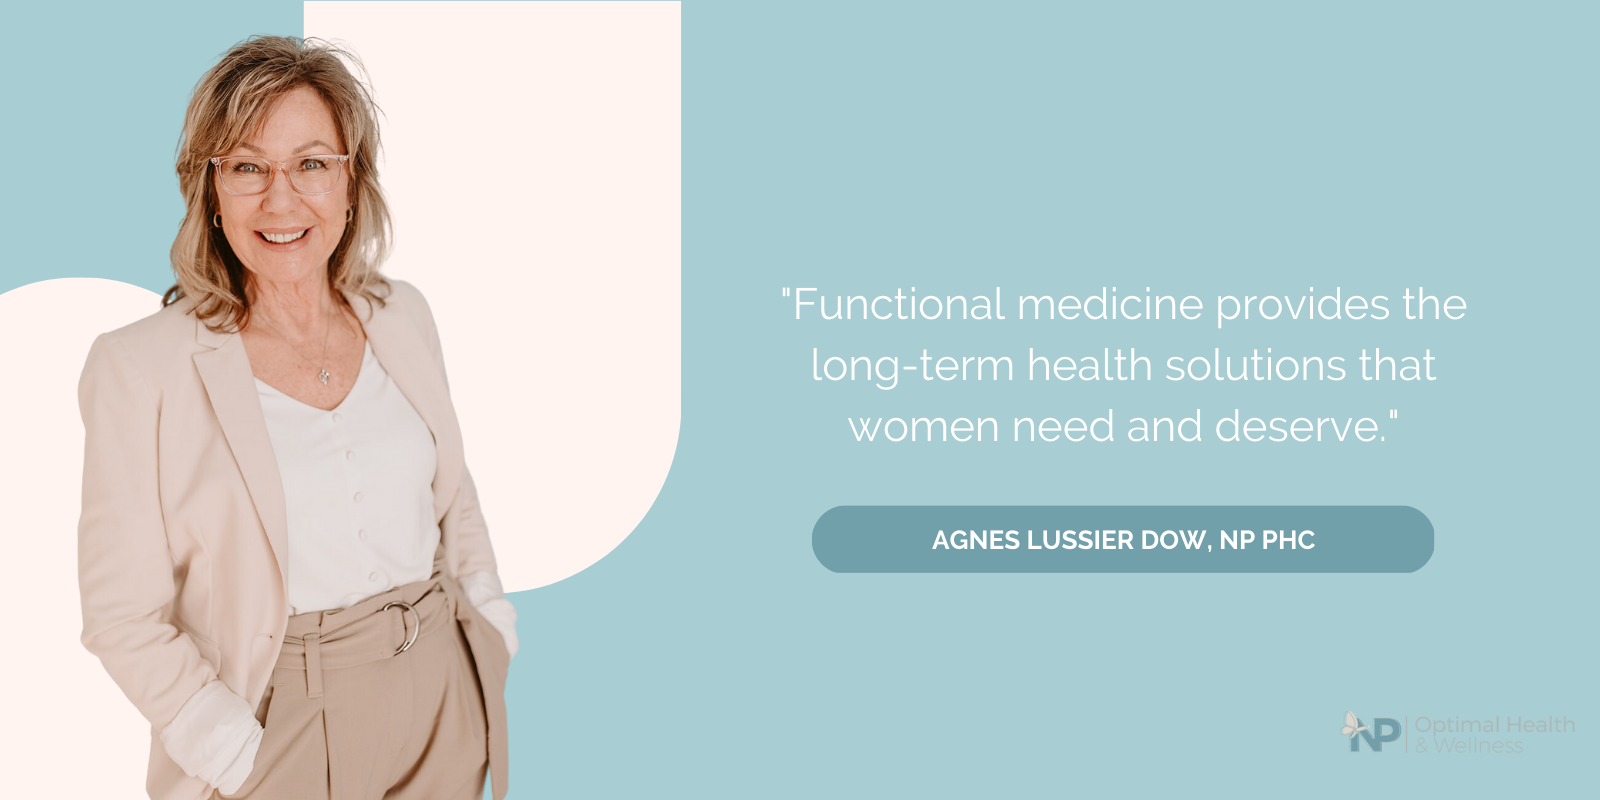 A woman stands on the left side of the image. She is wearing a pant suit and looks professional. On the right there is text that says ""Functional medicine provides the long-term health solutions that women need and deserve."